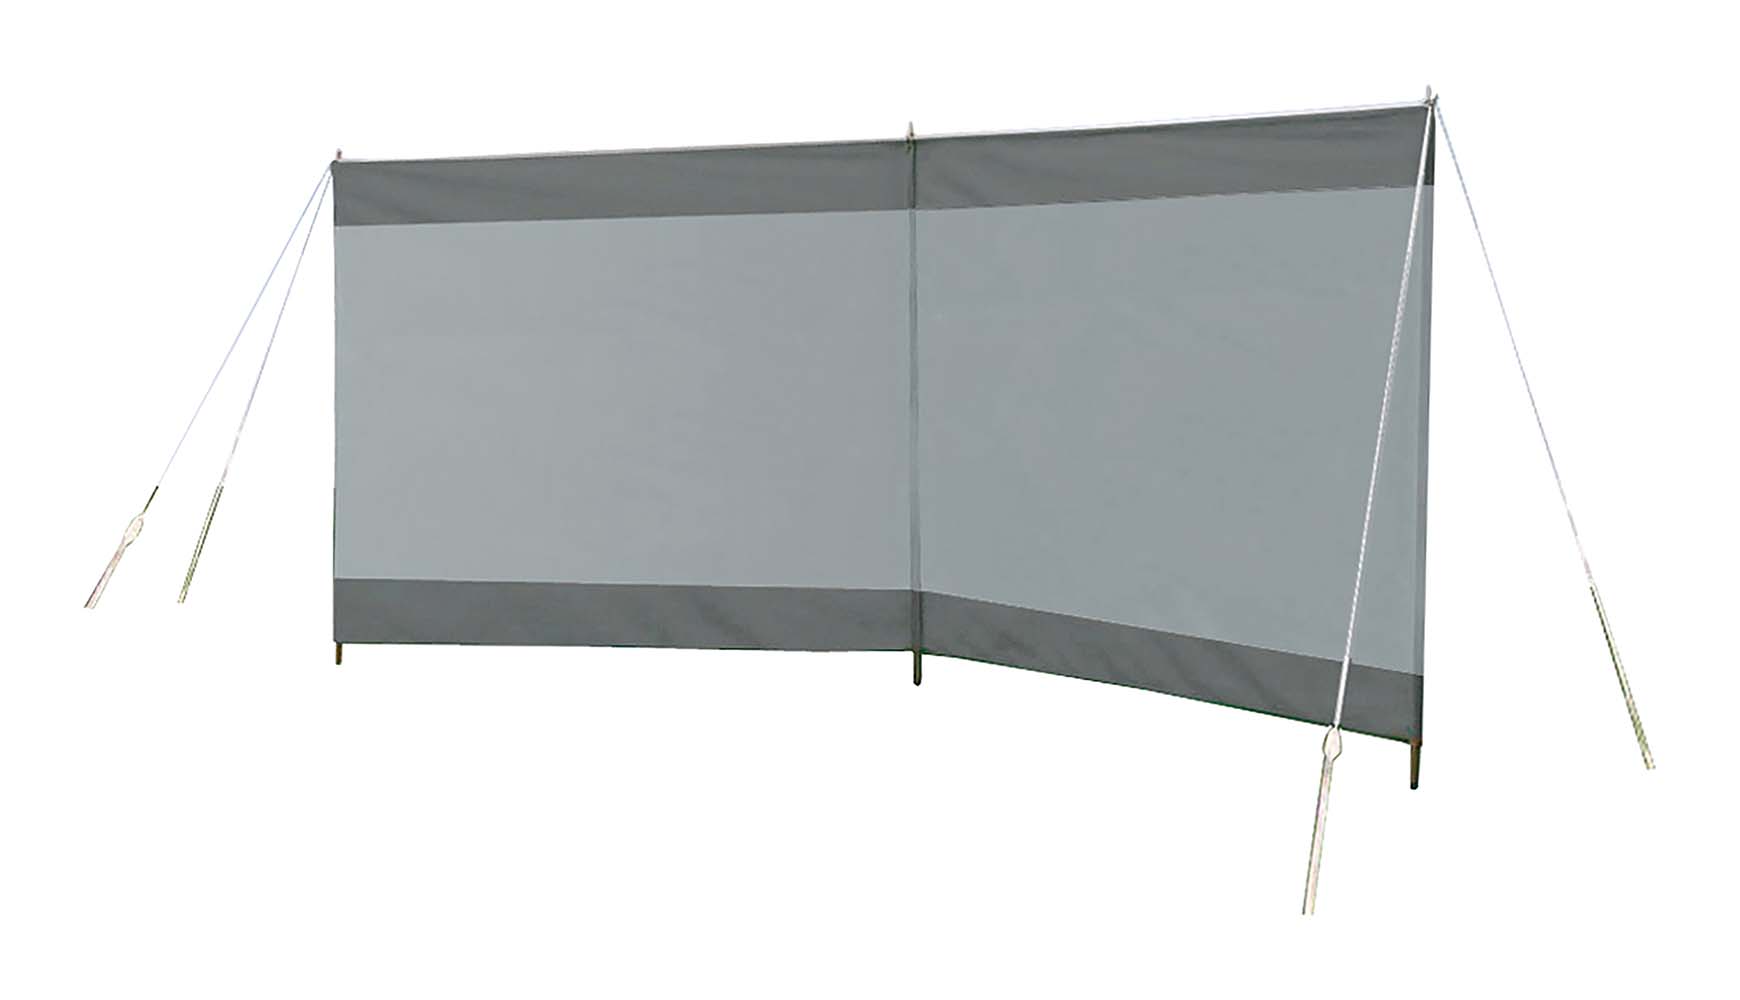 4367607 An extra stable, strong and linkable windbreak with a UV coating for a longer lifespan. Consists of 2 compartments. Is linkable by a zipper on both sides. Equipped with upper beams which provide extra stability. In addition, with extra thick steel poles (ø 19 mm) and a specially woven 300D Oxford polyester fabric. Comes complete with carrying bag, guy ropes and stronger pegs.